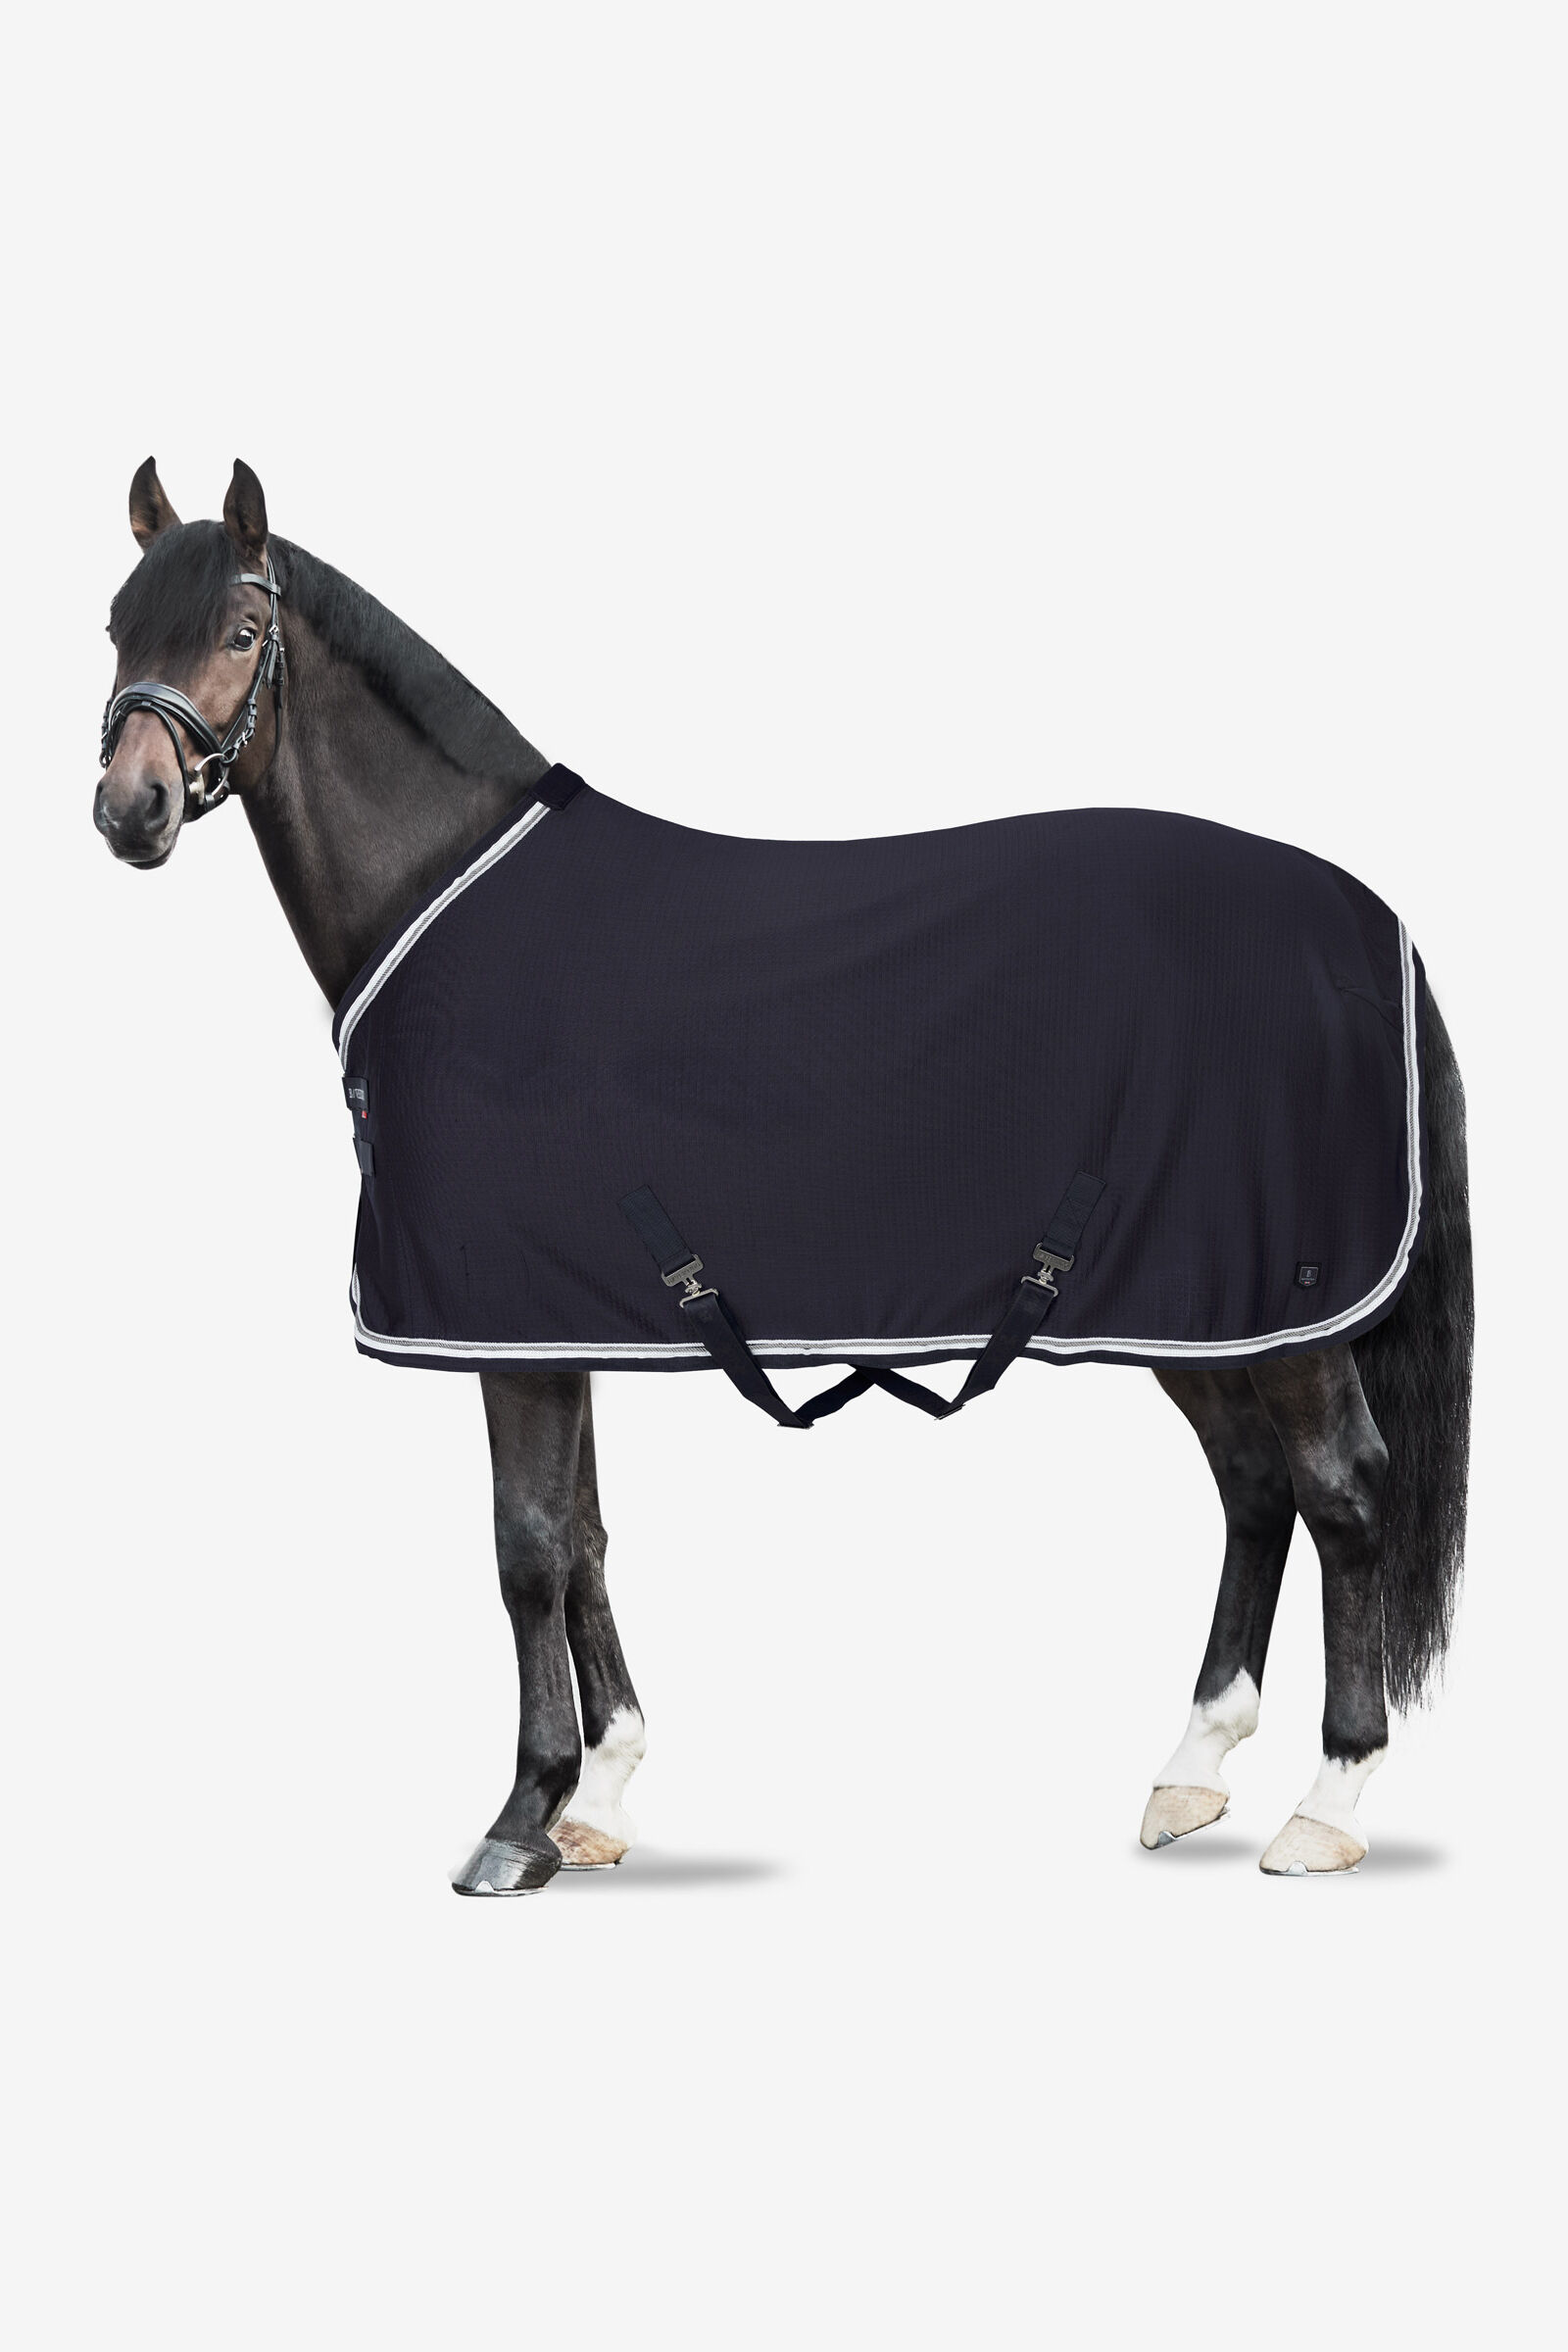 Horze Turner Thermo Quick Dry Bonded Fleece Cooler 